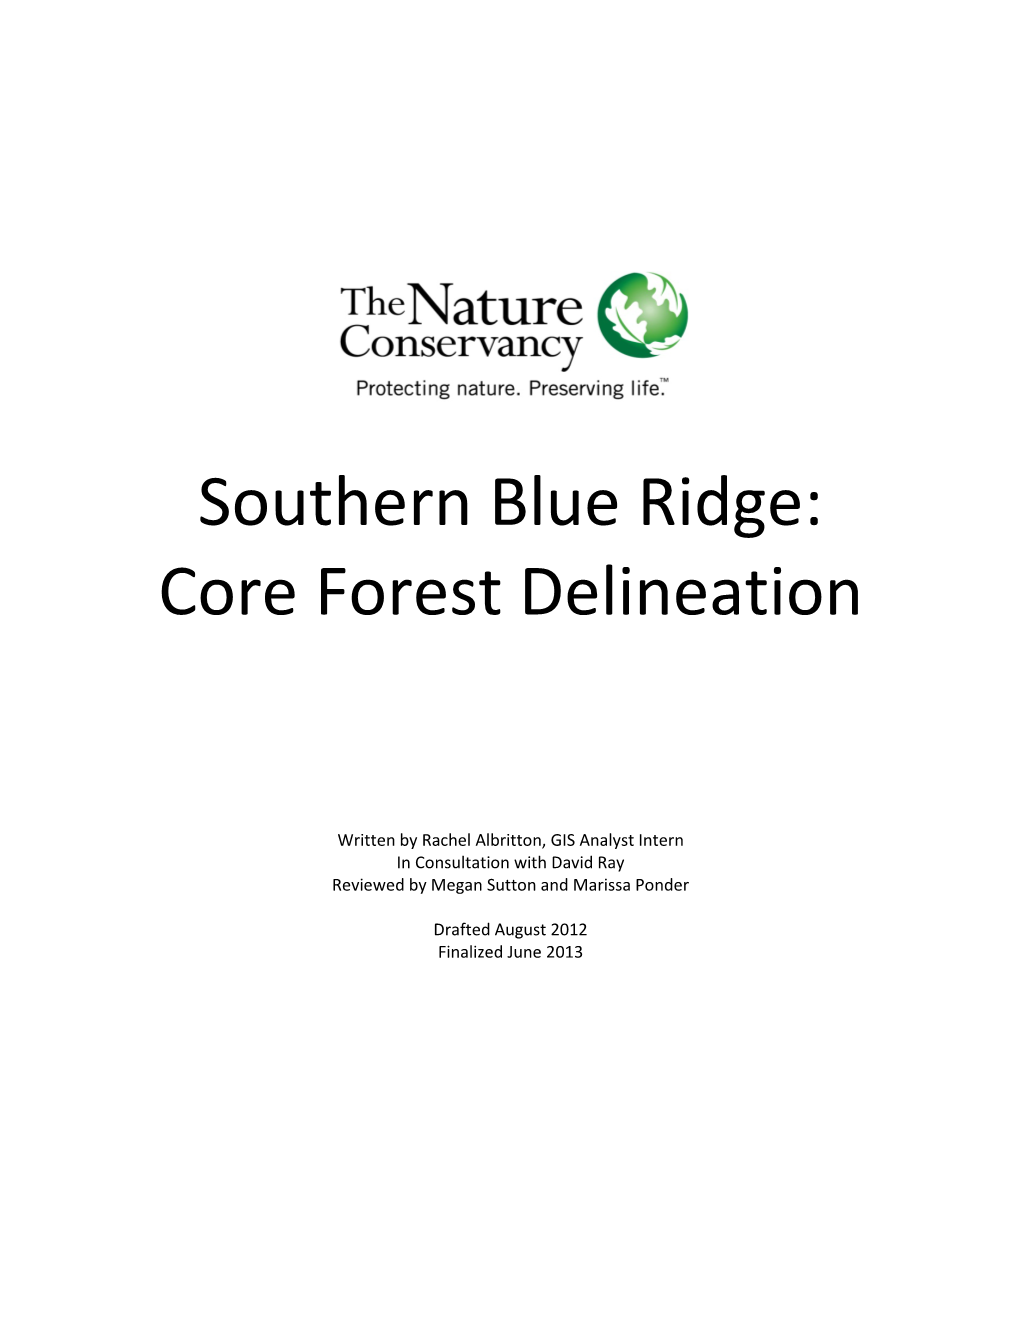 Core Forest Delineation